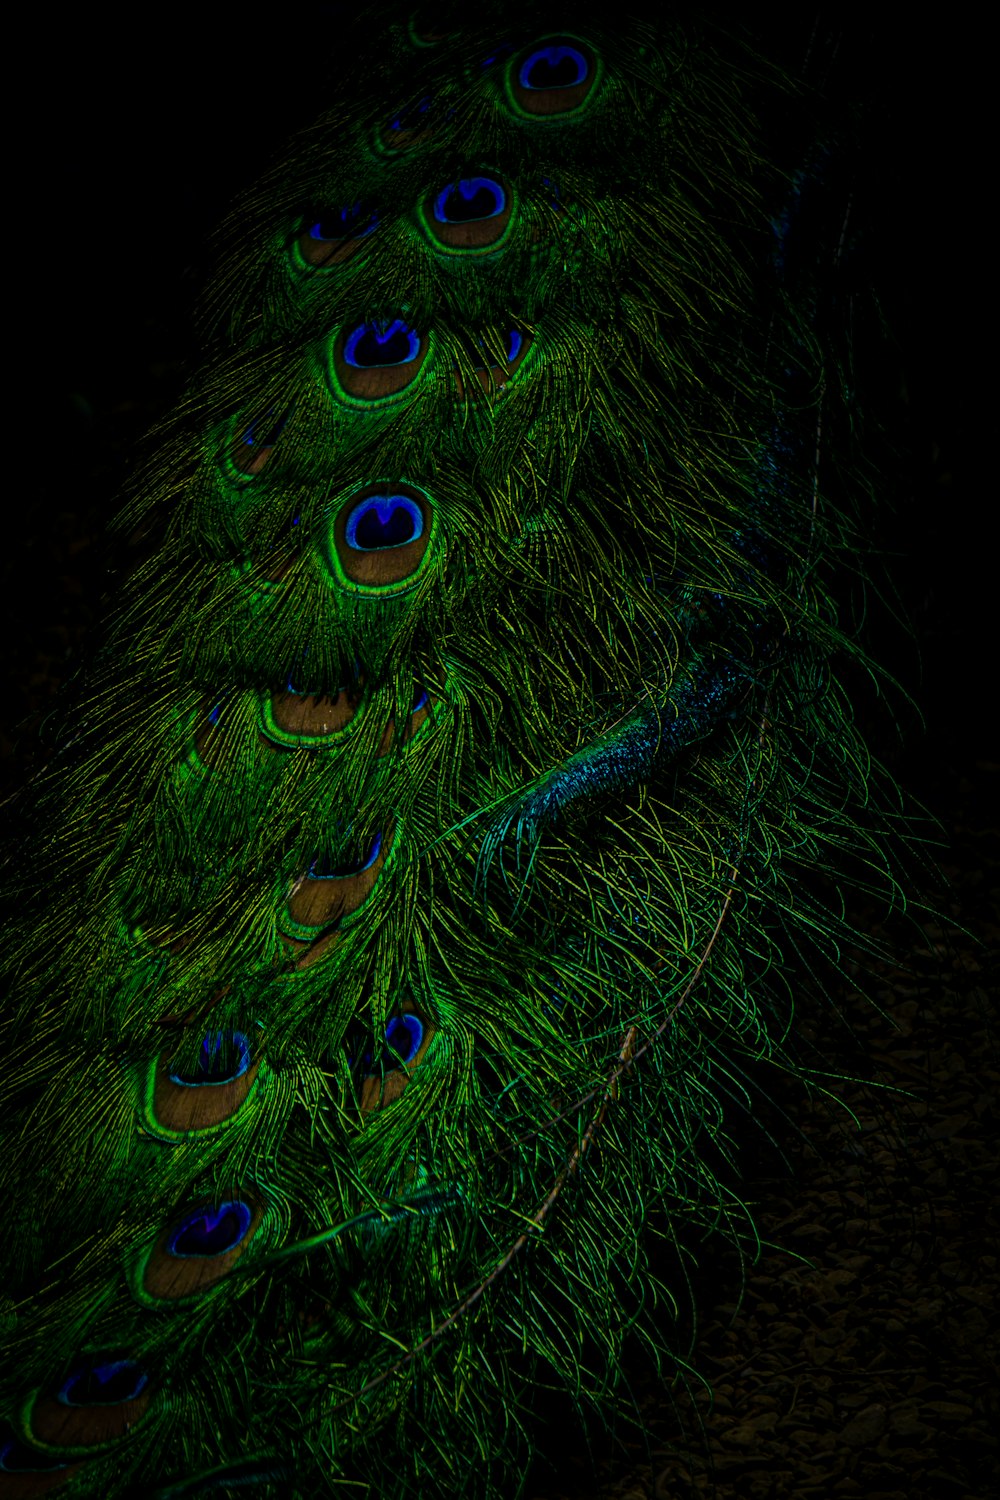 a close up of a peacock's feathers in the dark